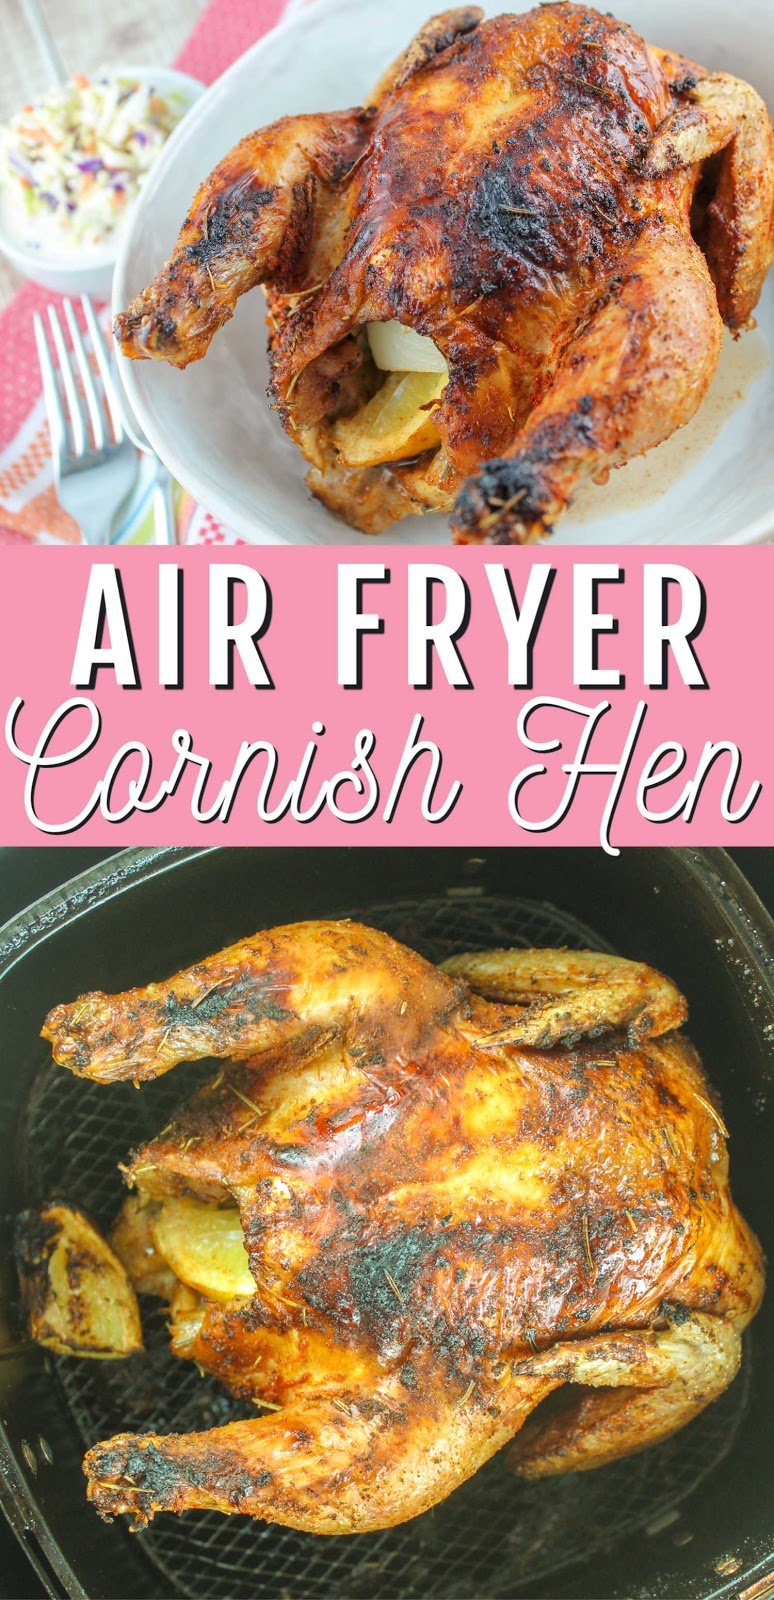 I love roasted chicken – but when cooking for 1-2 – a whole chicken is a lot – this air fryer cornish hen recipe makes delicious, juicy roasted chicken in less than 30 minutes!
 via @foodhussy